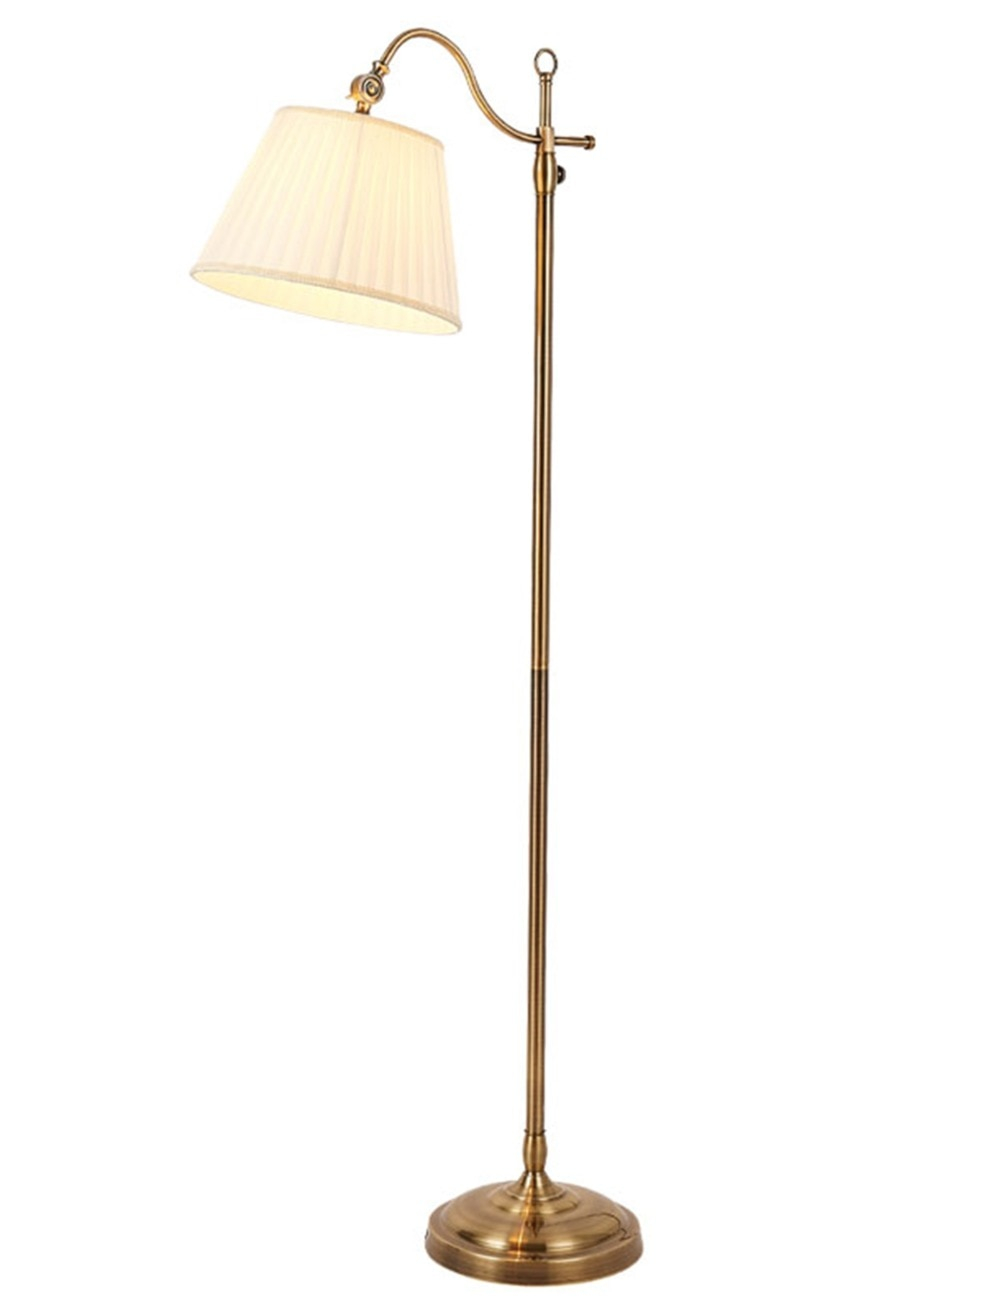 Us 1592 20 Offhuaxinv Led Floor Lamp Modern With Hanging Shade Heavy Base Industrial Uplight Downlight With Ambient Lighting For Indoor In Floor regarding dimensions 1000 X 1300